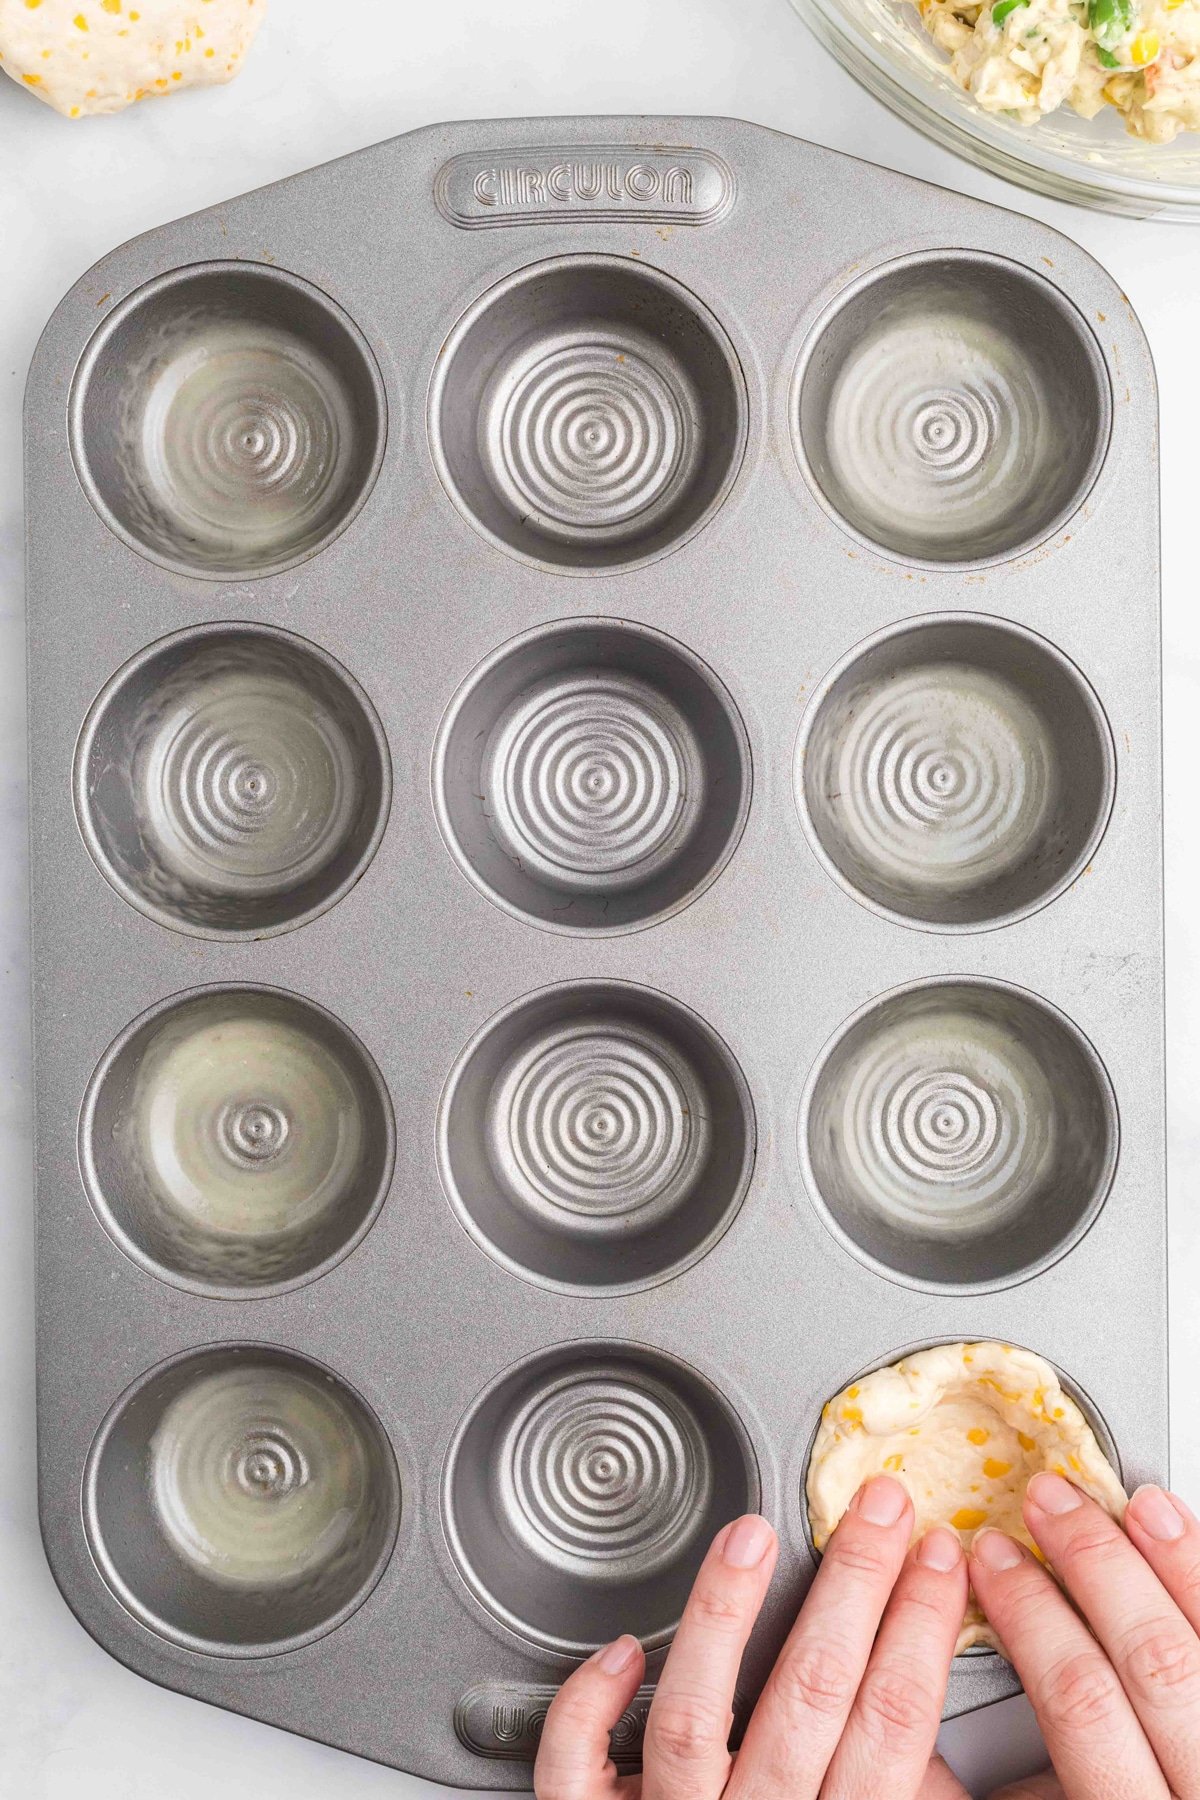 A hand pressing a biscuit into a muffin tin